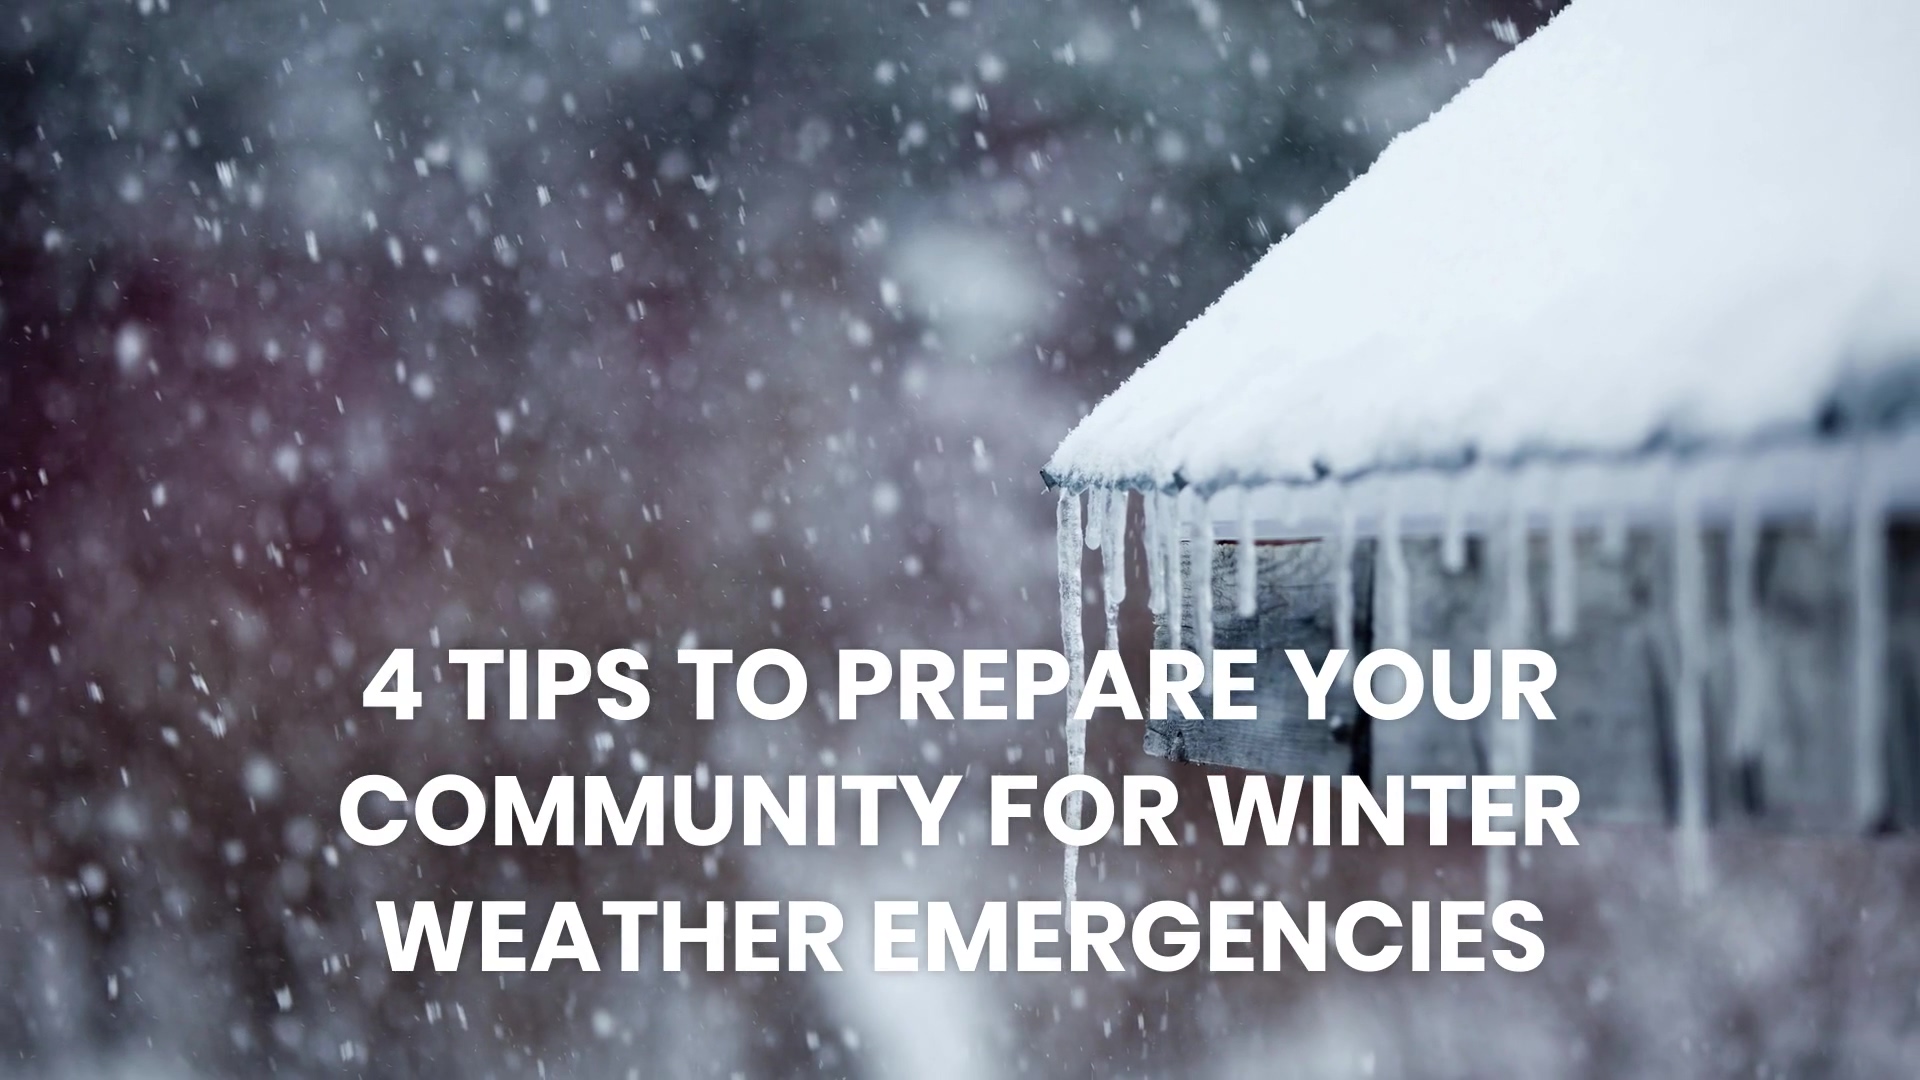 RealManage - 4 Tips to Prepare Your Community for Winter Weather Emergencies.mp4